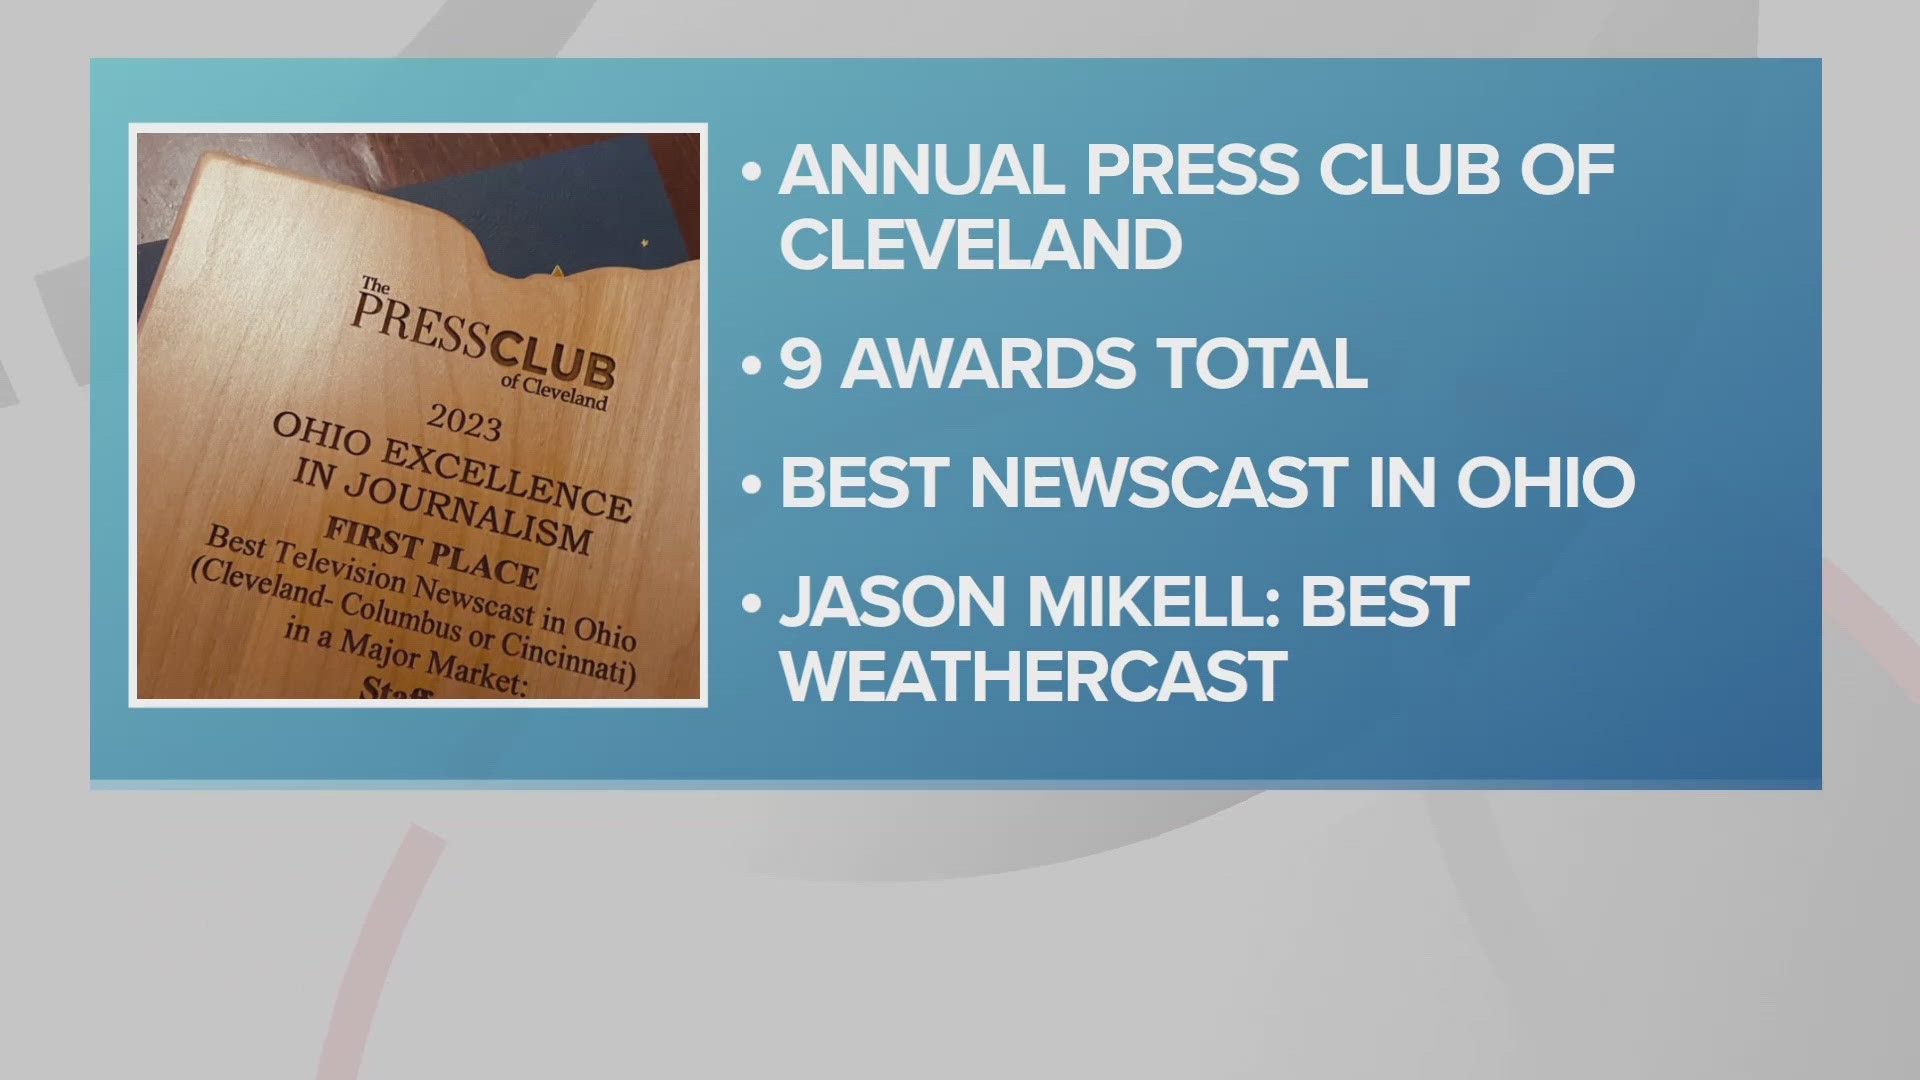 In addition, 3News Meteorologist Jason Mikell took home first place honors for 'Best Weathercast' during Friday's awards at the House of Blues.